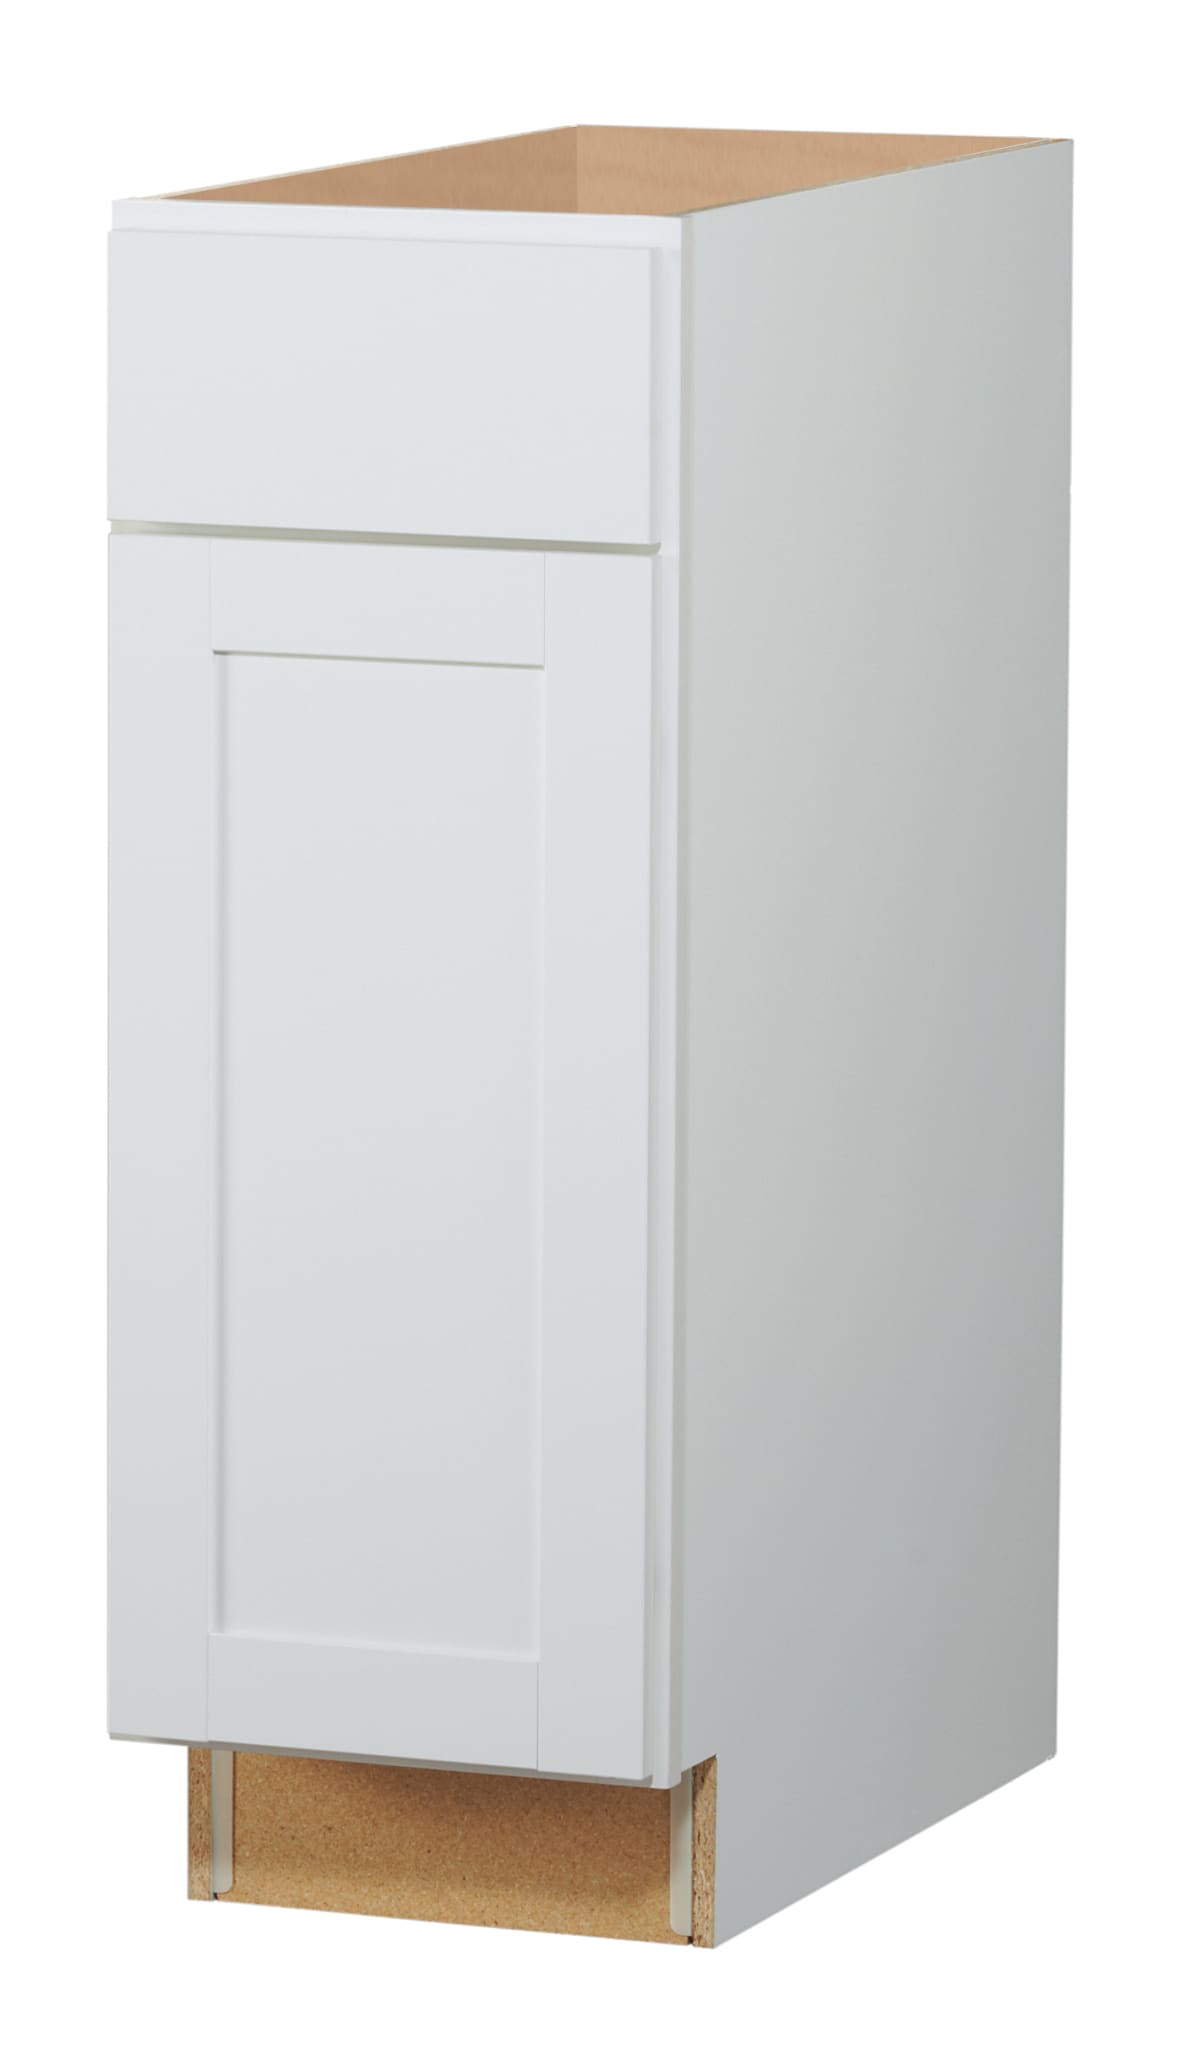 Stock Cabinet In The Kitchen Cabinets, 12 Inch Cabinet Doors